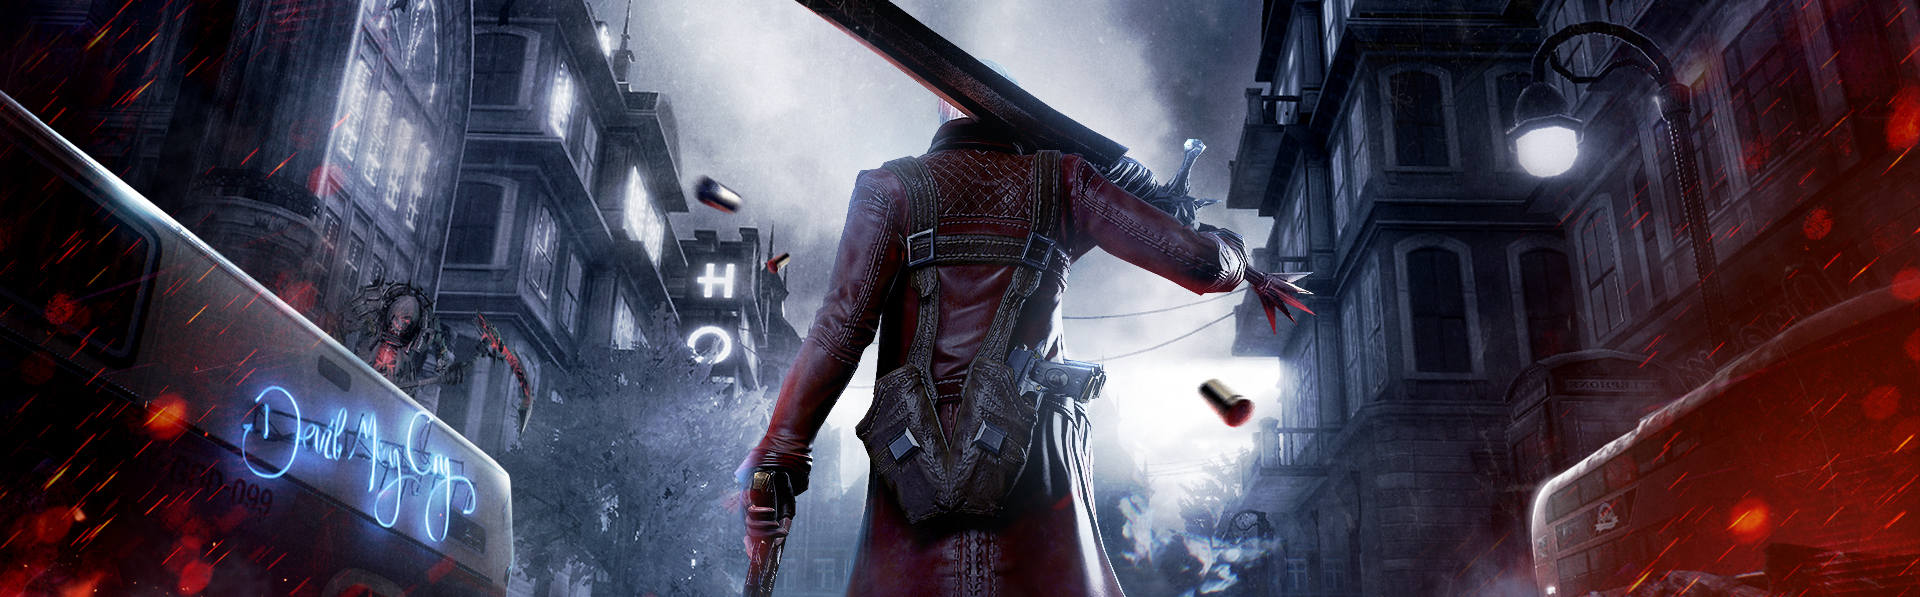 Devil May Cry Pinnacle Of Combat Gets New Gameplay Footage In Prep For